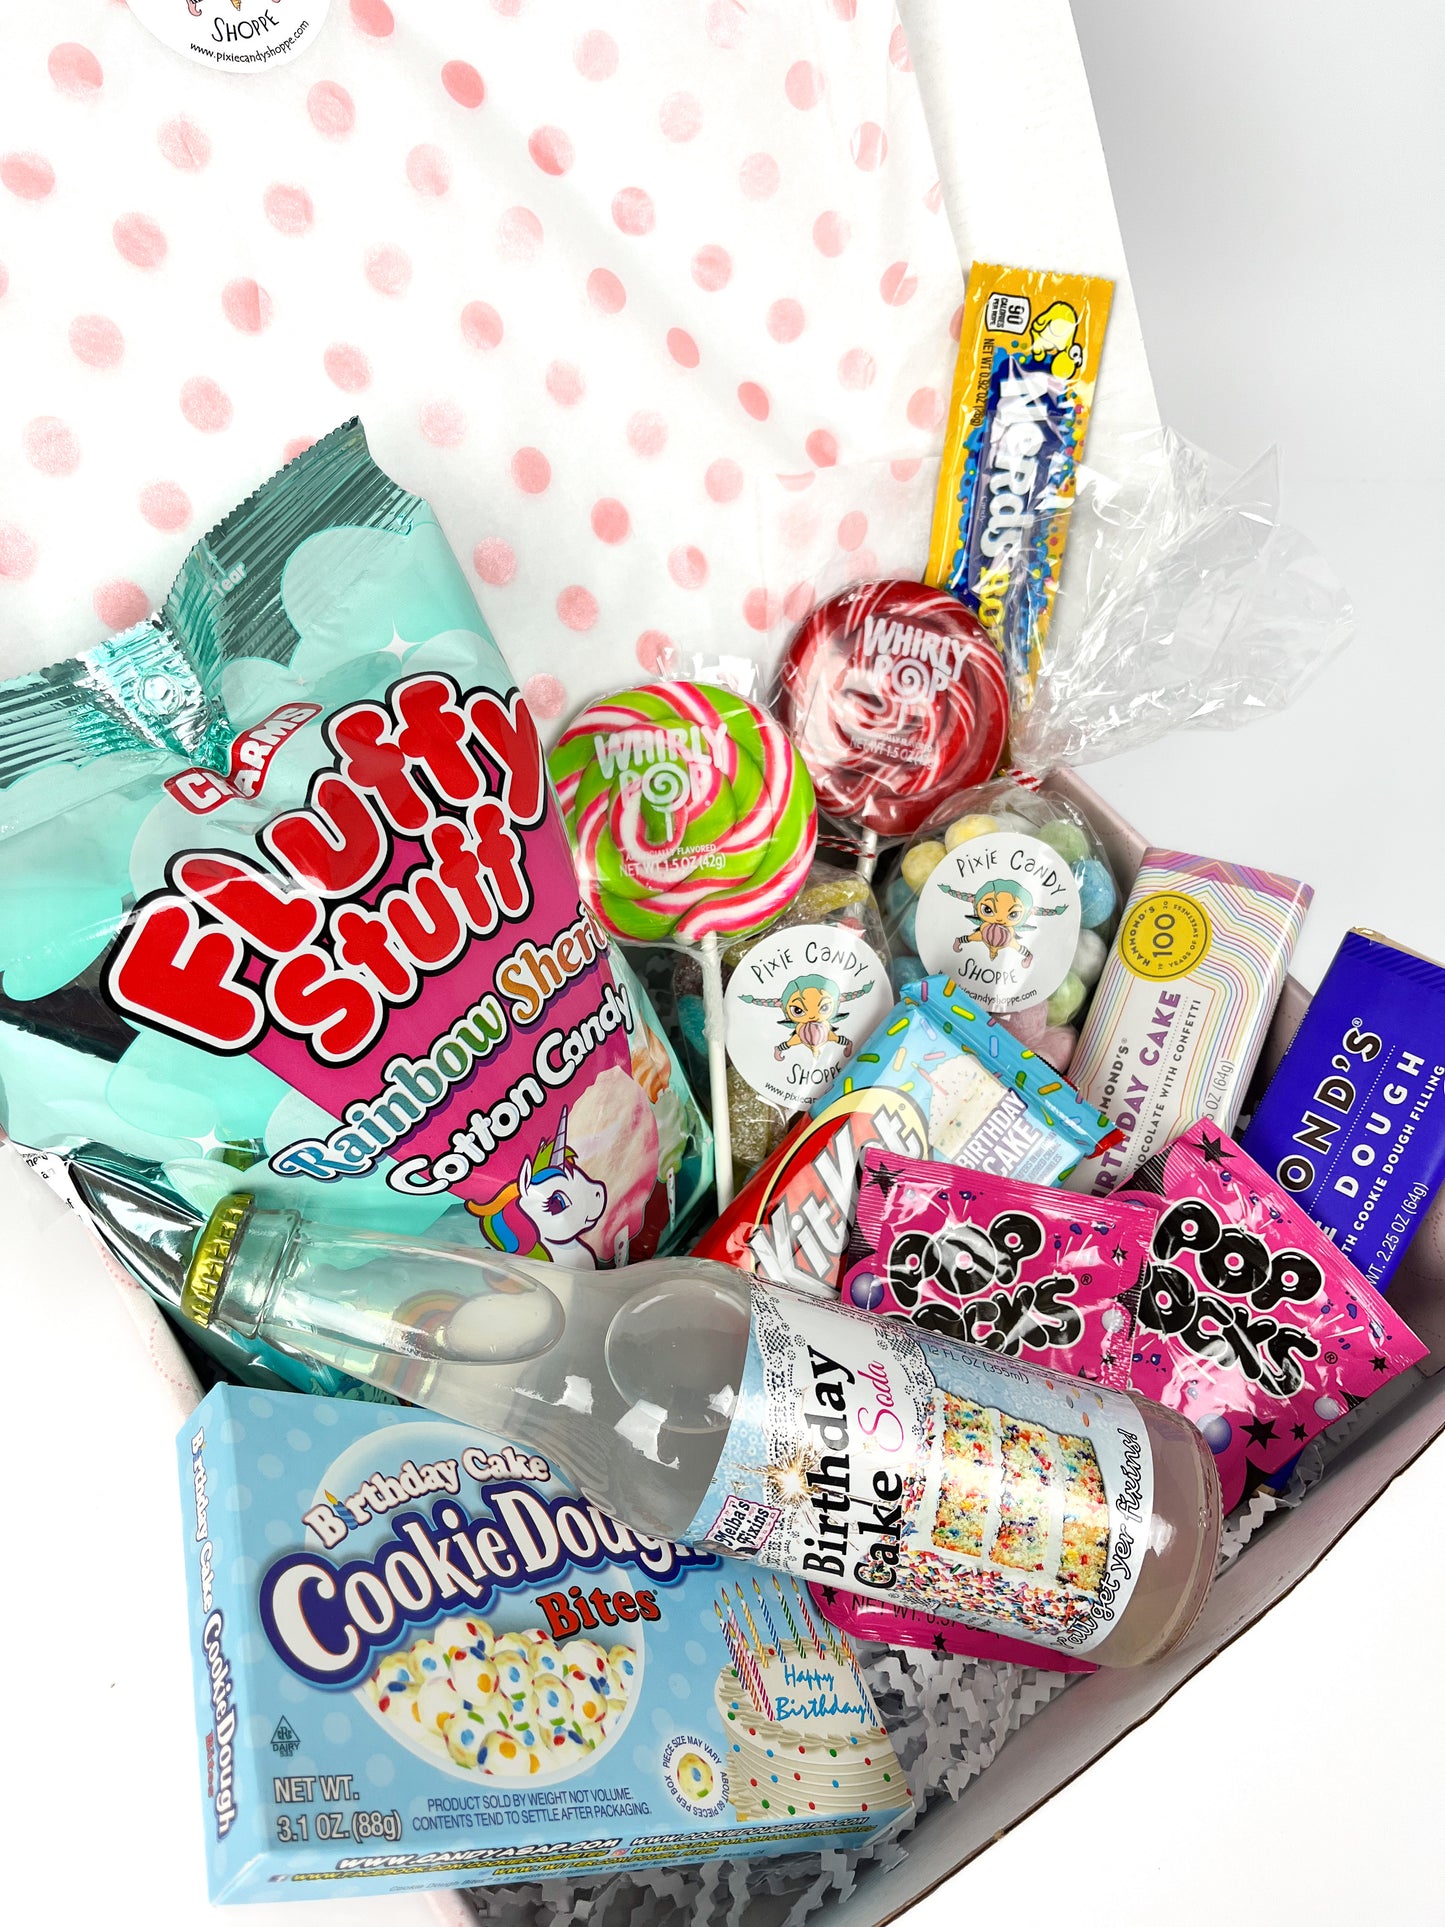 An assortment of birthday themed candy and treats inside a branded shipping box.